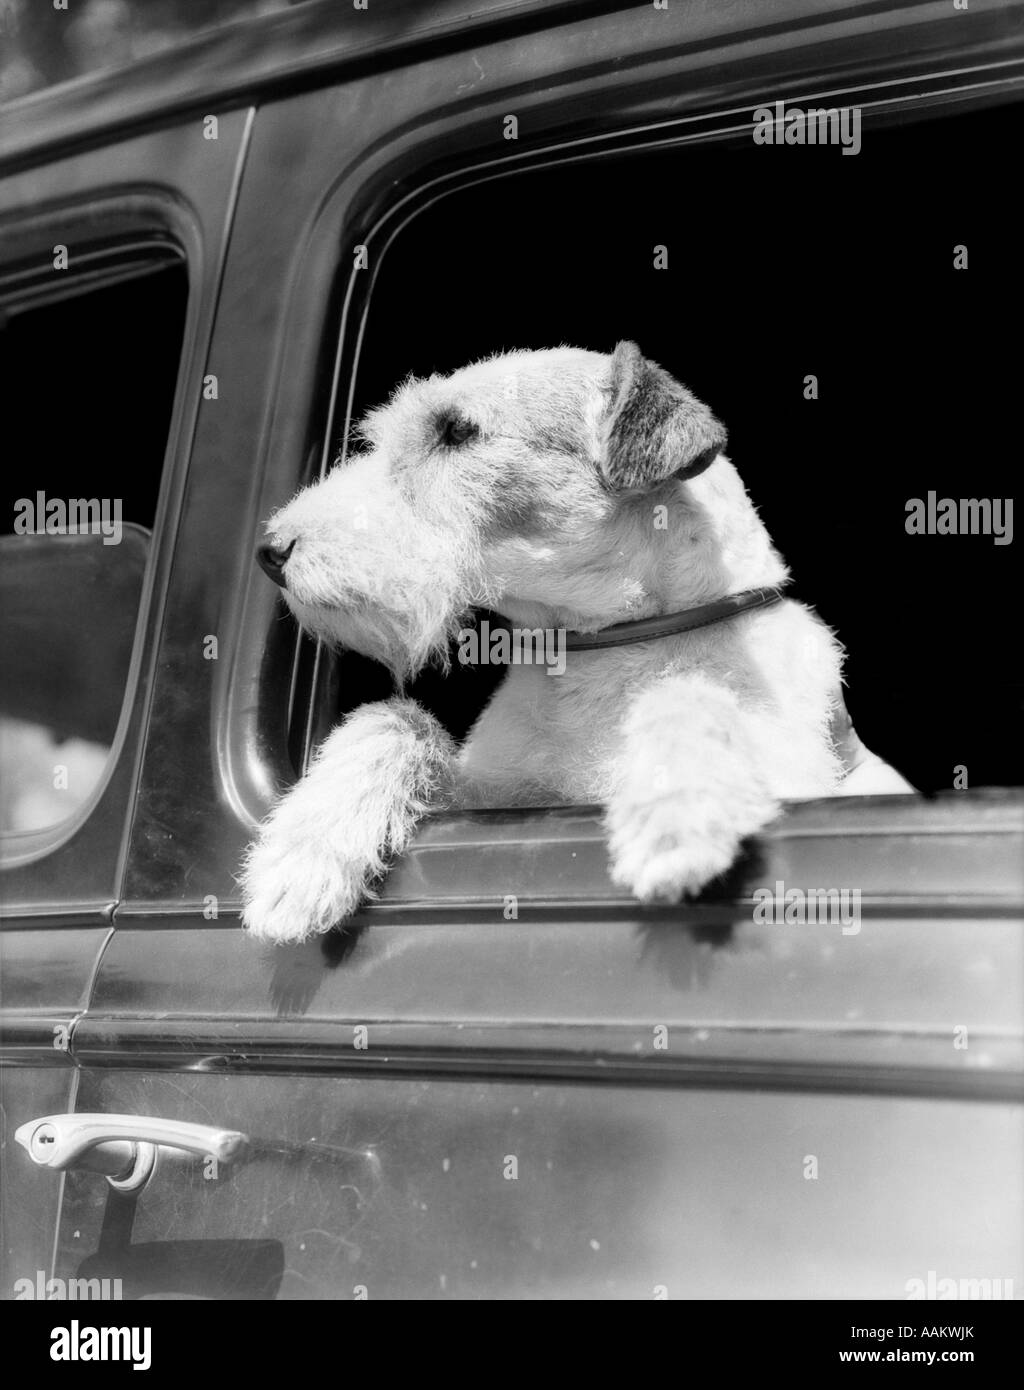 PROFILE PORTRAIT OF WIRE FOX TERRIER DOG LOOKING OUT OF AUTOMOBILE WINDOW Stock Photo